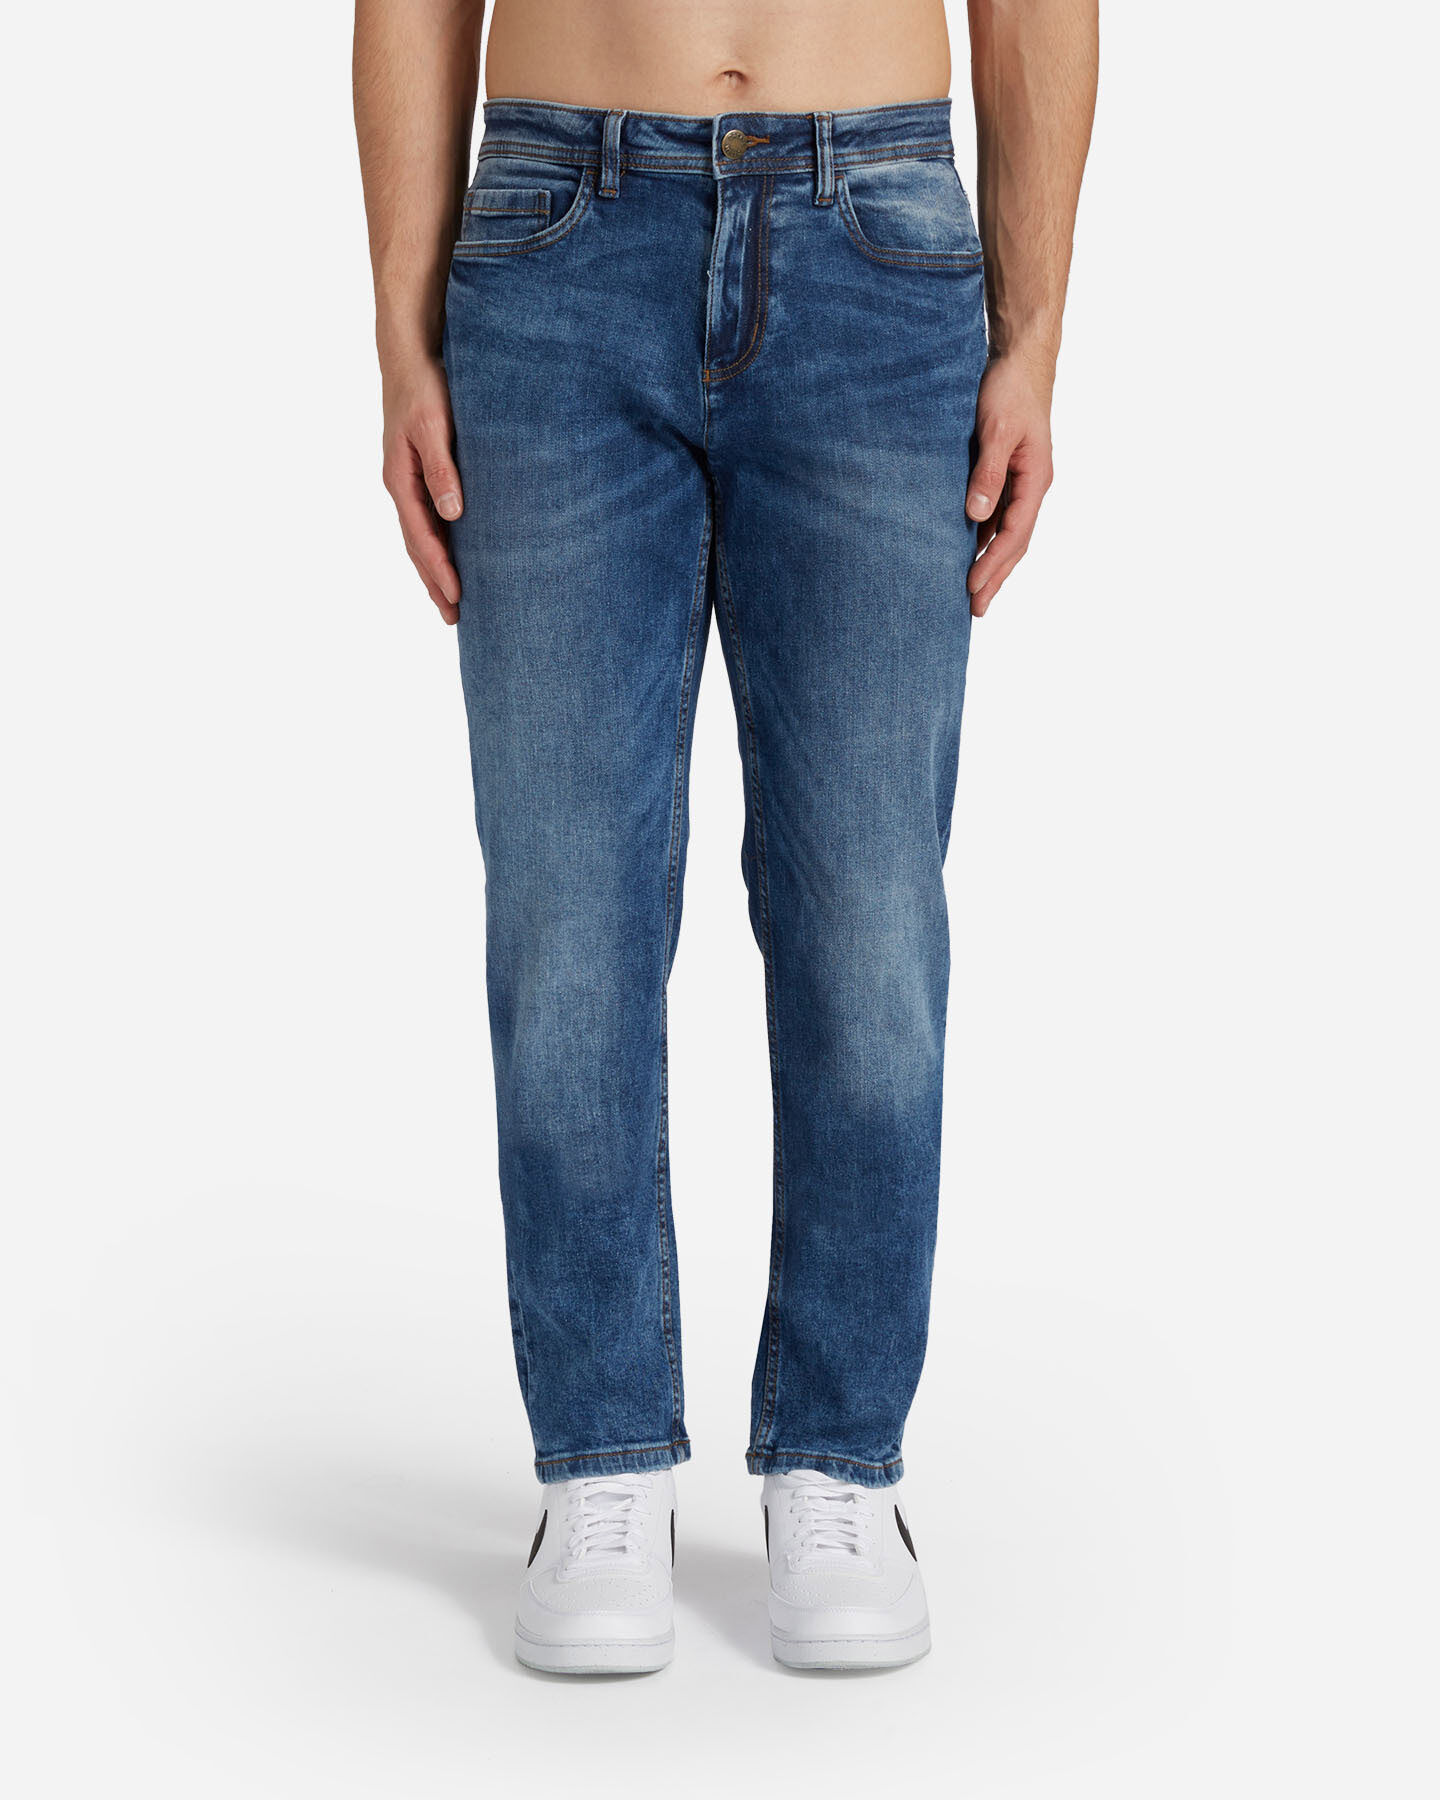  Jeans DACK'S ESSENTIAL M S4129647|MD|44 scatto 0